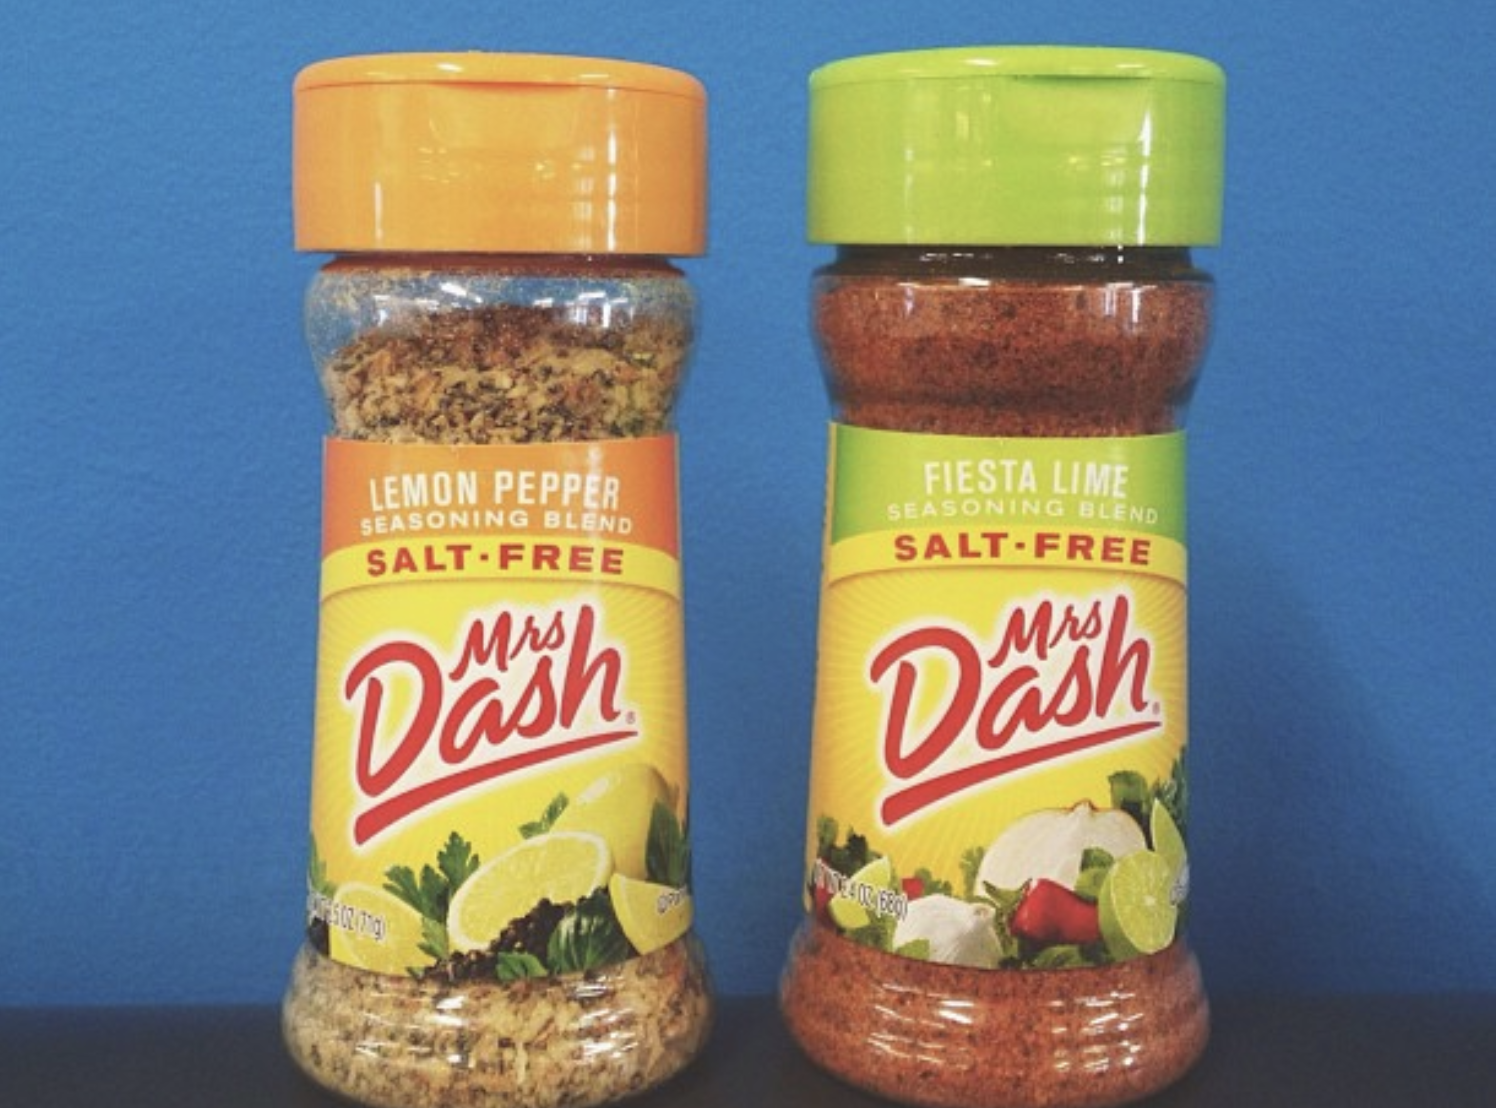 Mrs. Dash seasoning is getting a new name after almost 40 years